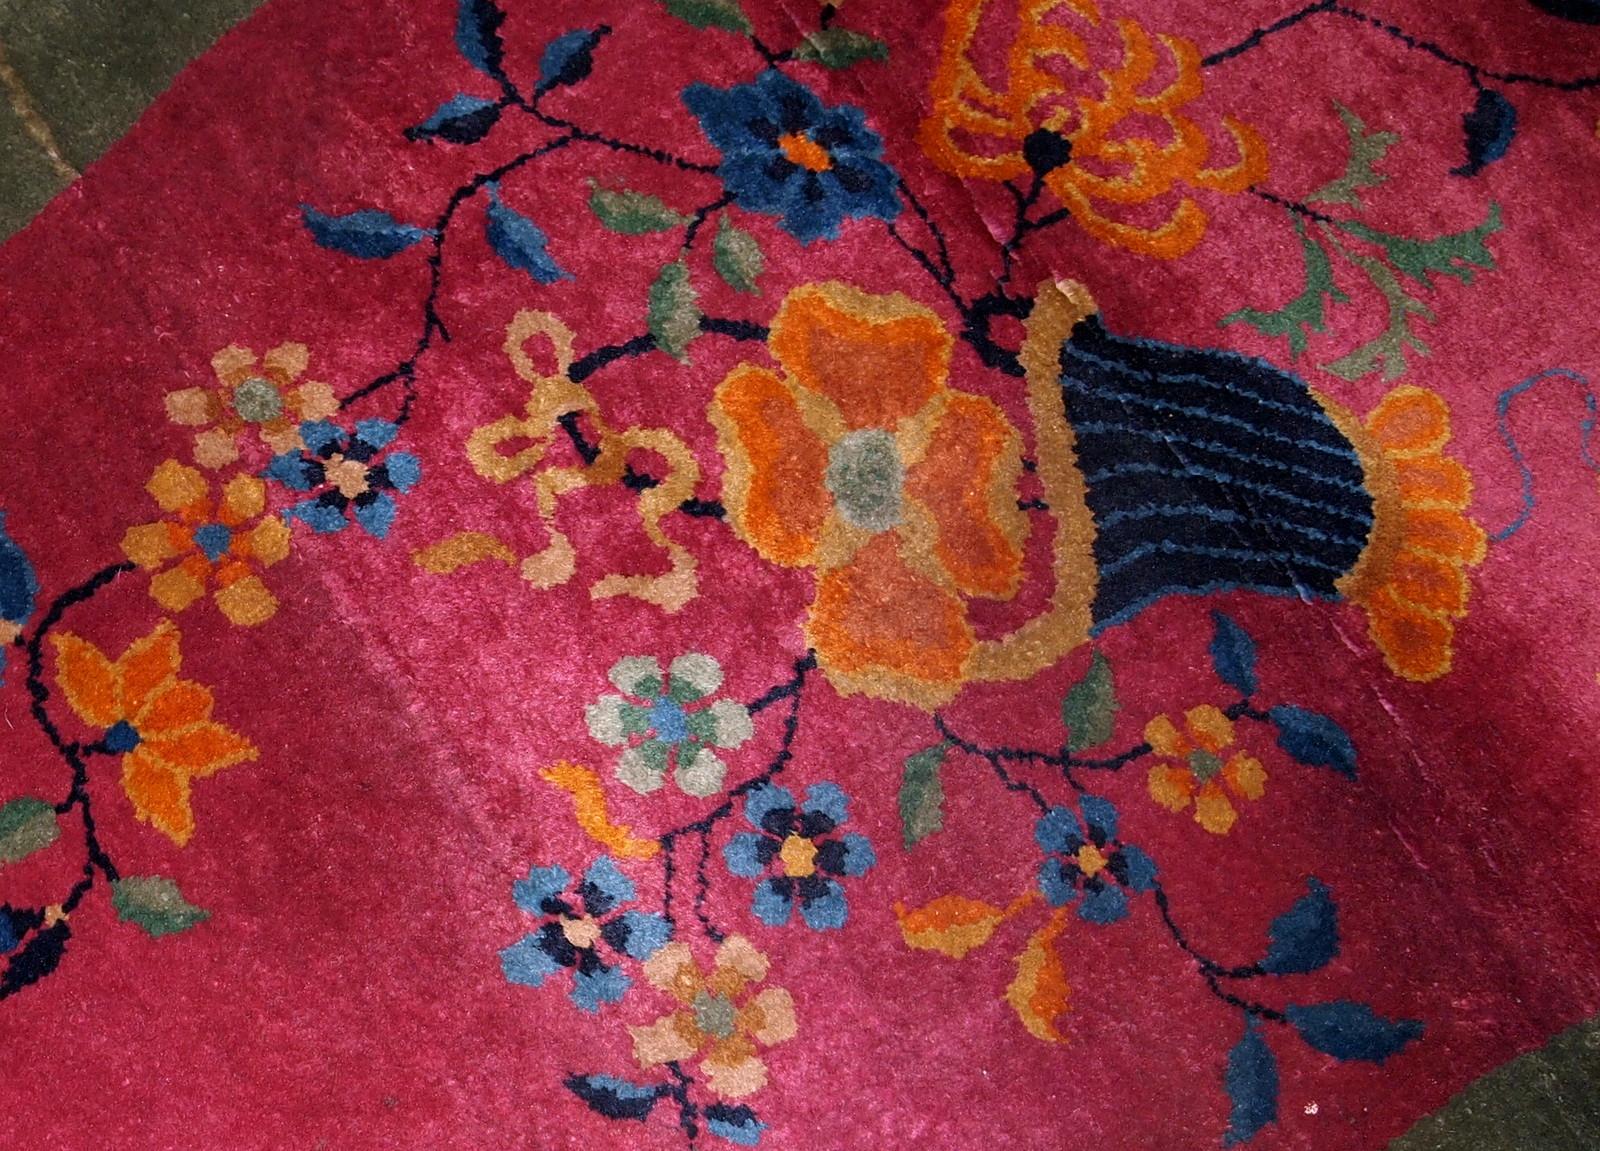 Handmade antique oval decorative rug from China in original good condition. The rug is in fuchsia and green shades.

- Condition: original good,

- circa: 1920s,

- Size: 2.10' x 4.10' ( 89cm x 150cm ),

- Material: wool,

- Country of